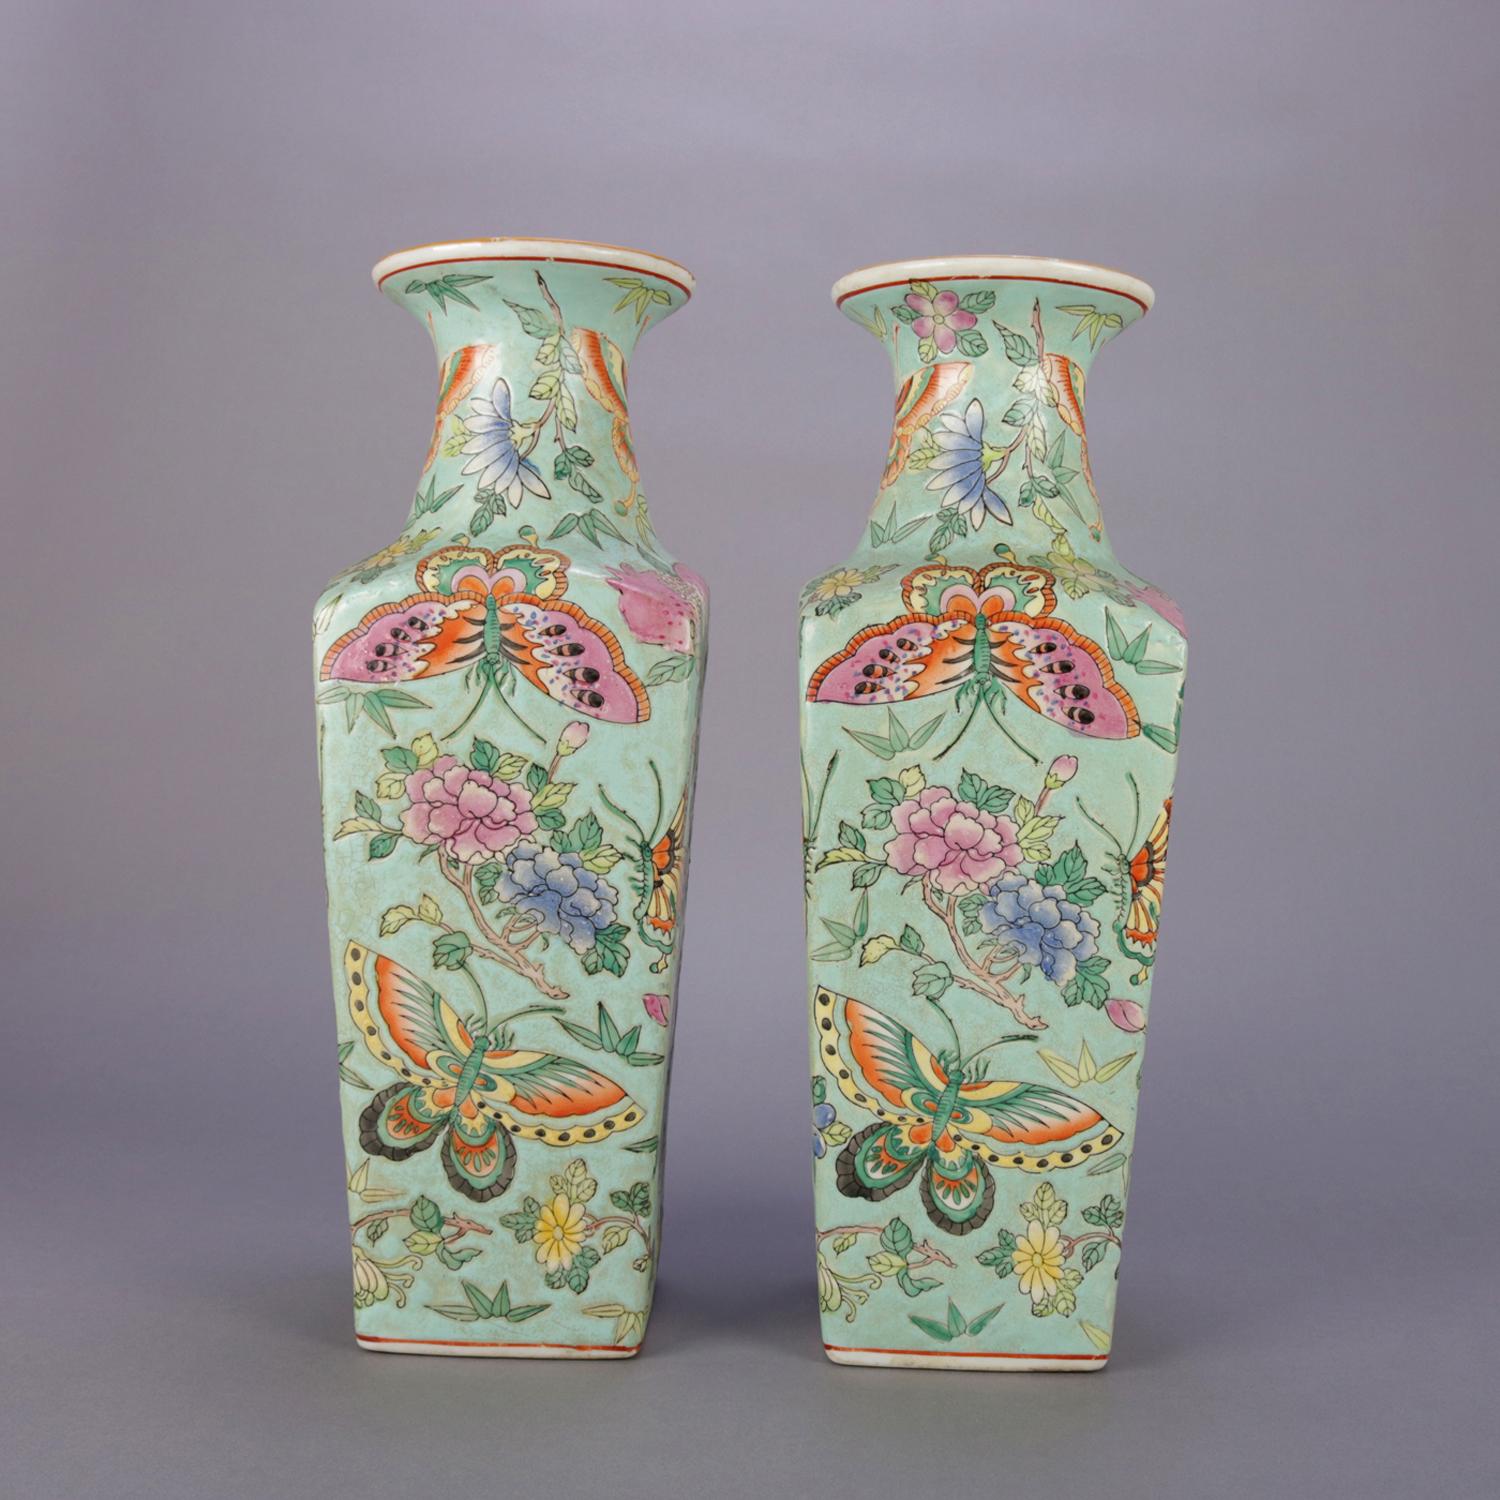 20th Century Antique Chinese Famille Rose Enameled Butterfly Ceramic Signed Vases, circa 1900